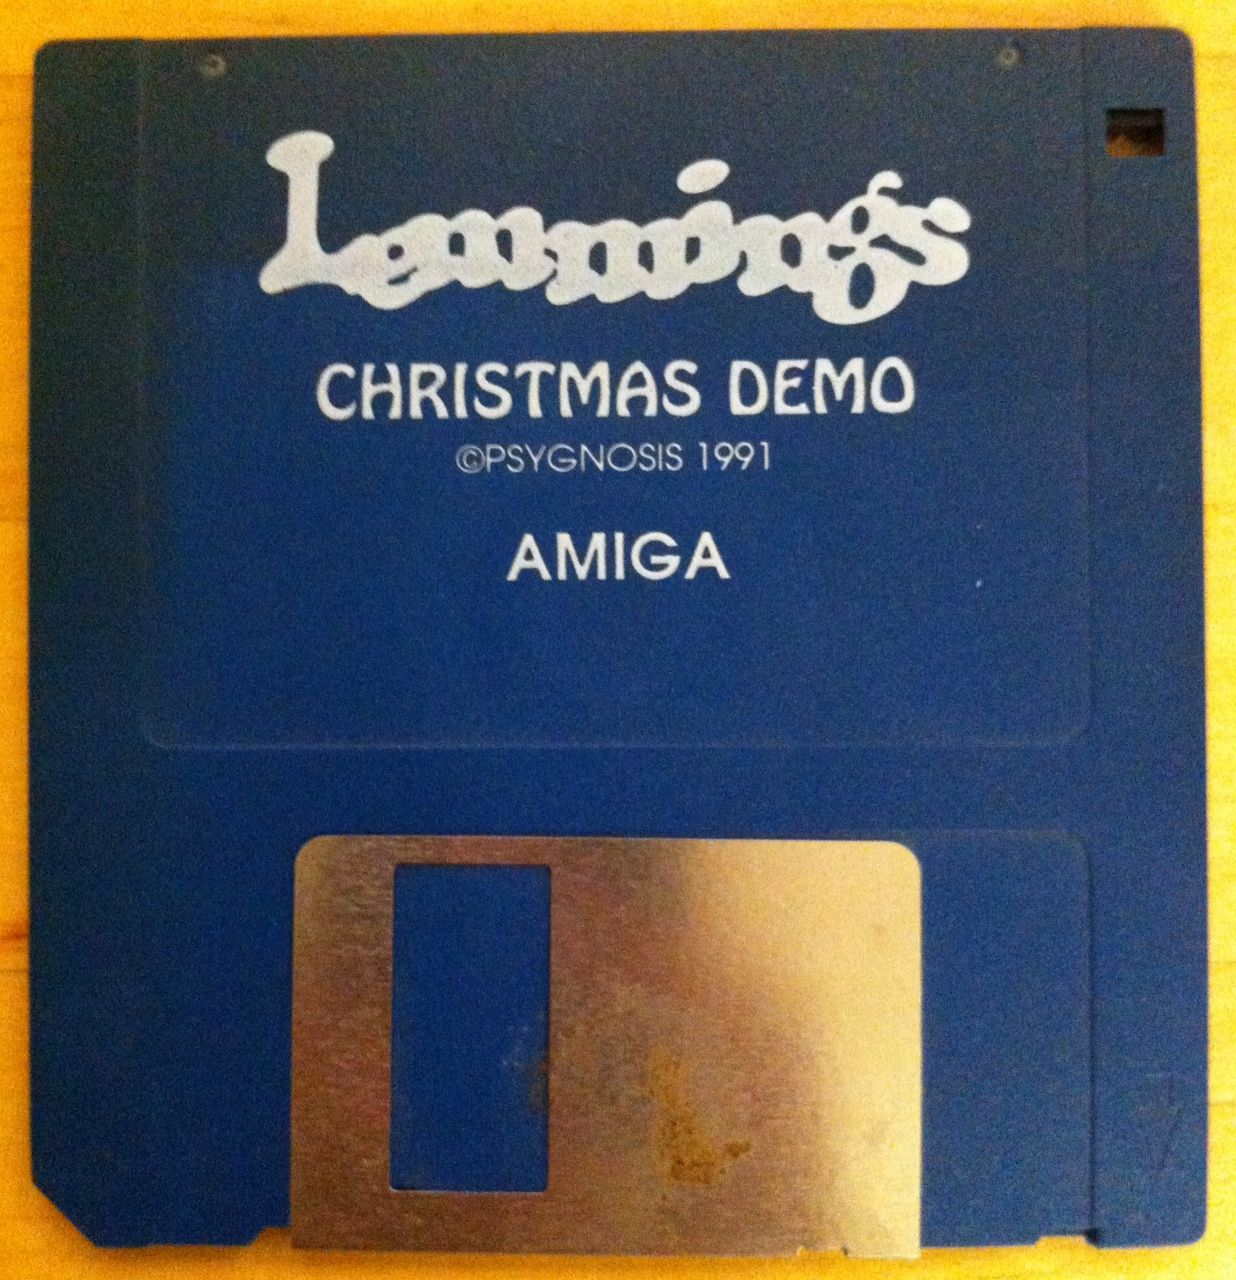 What Happened to Lemmings?